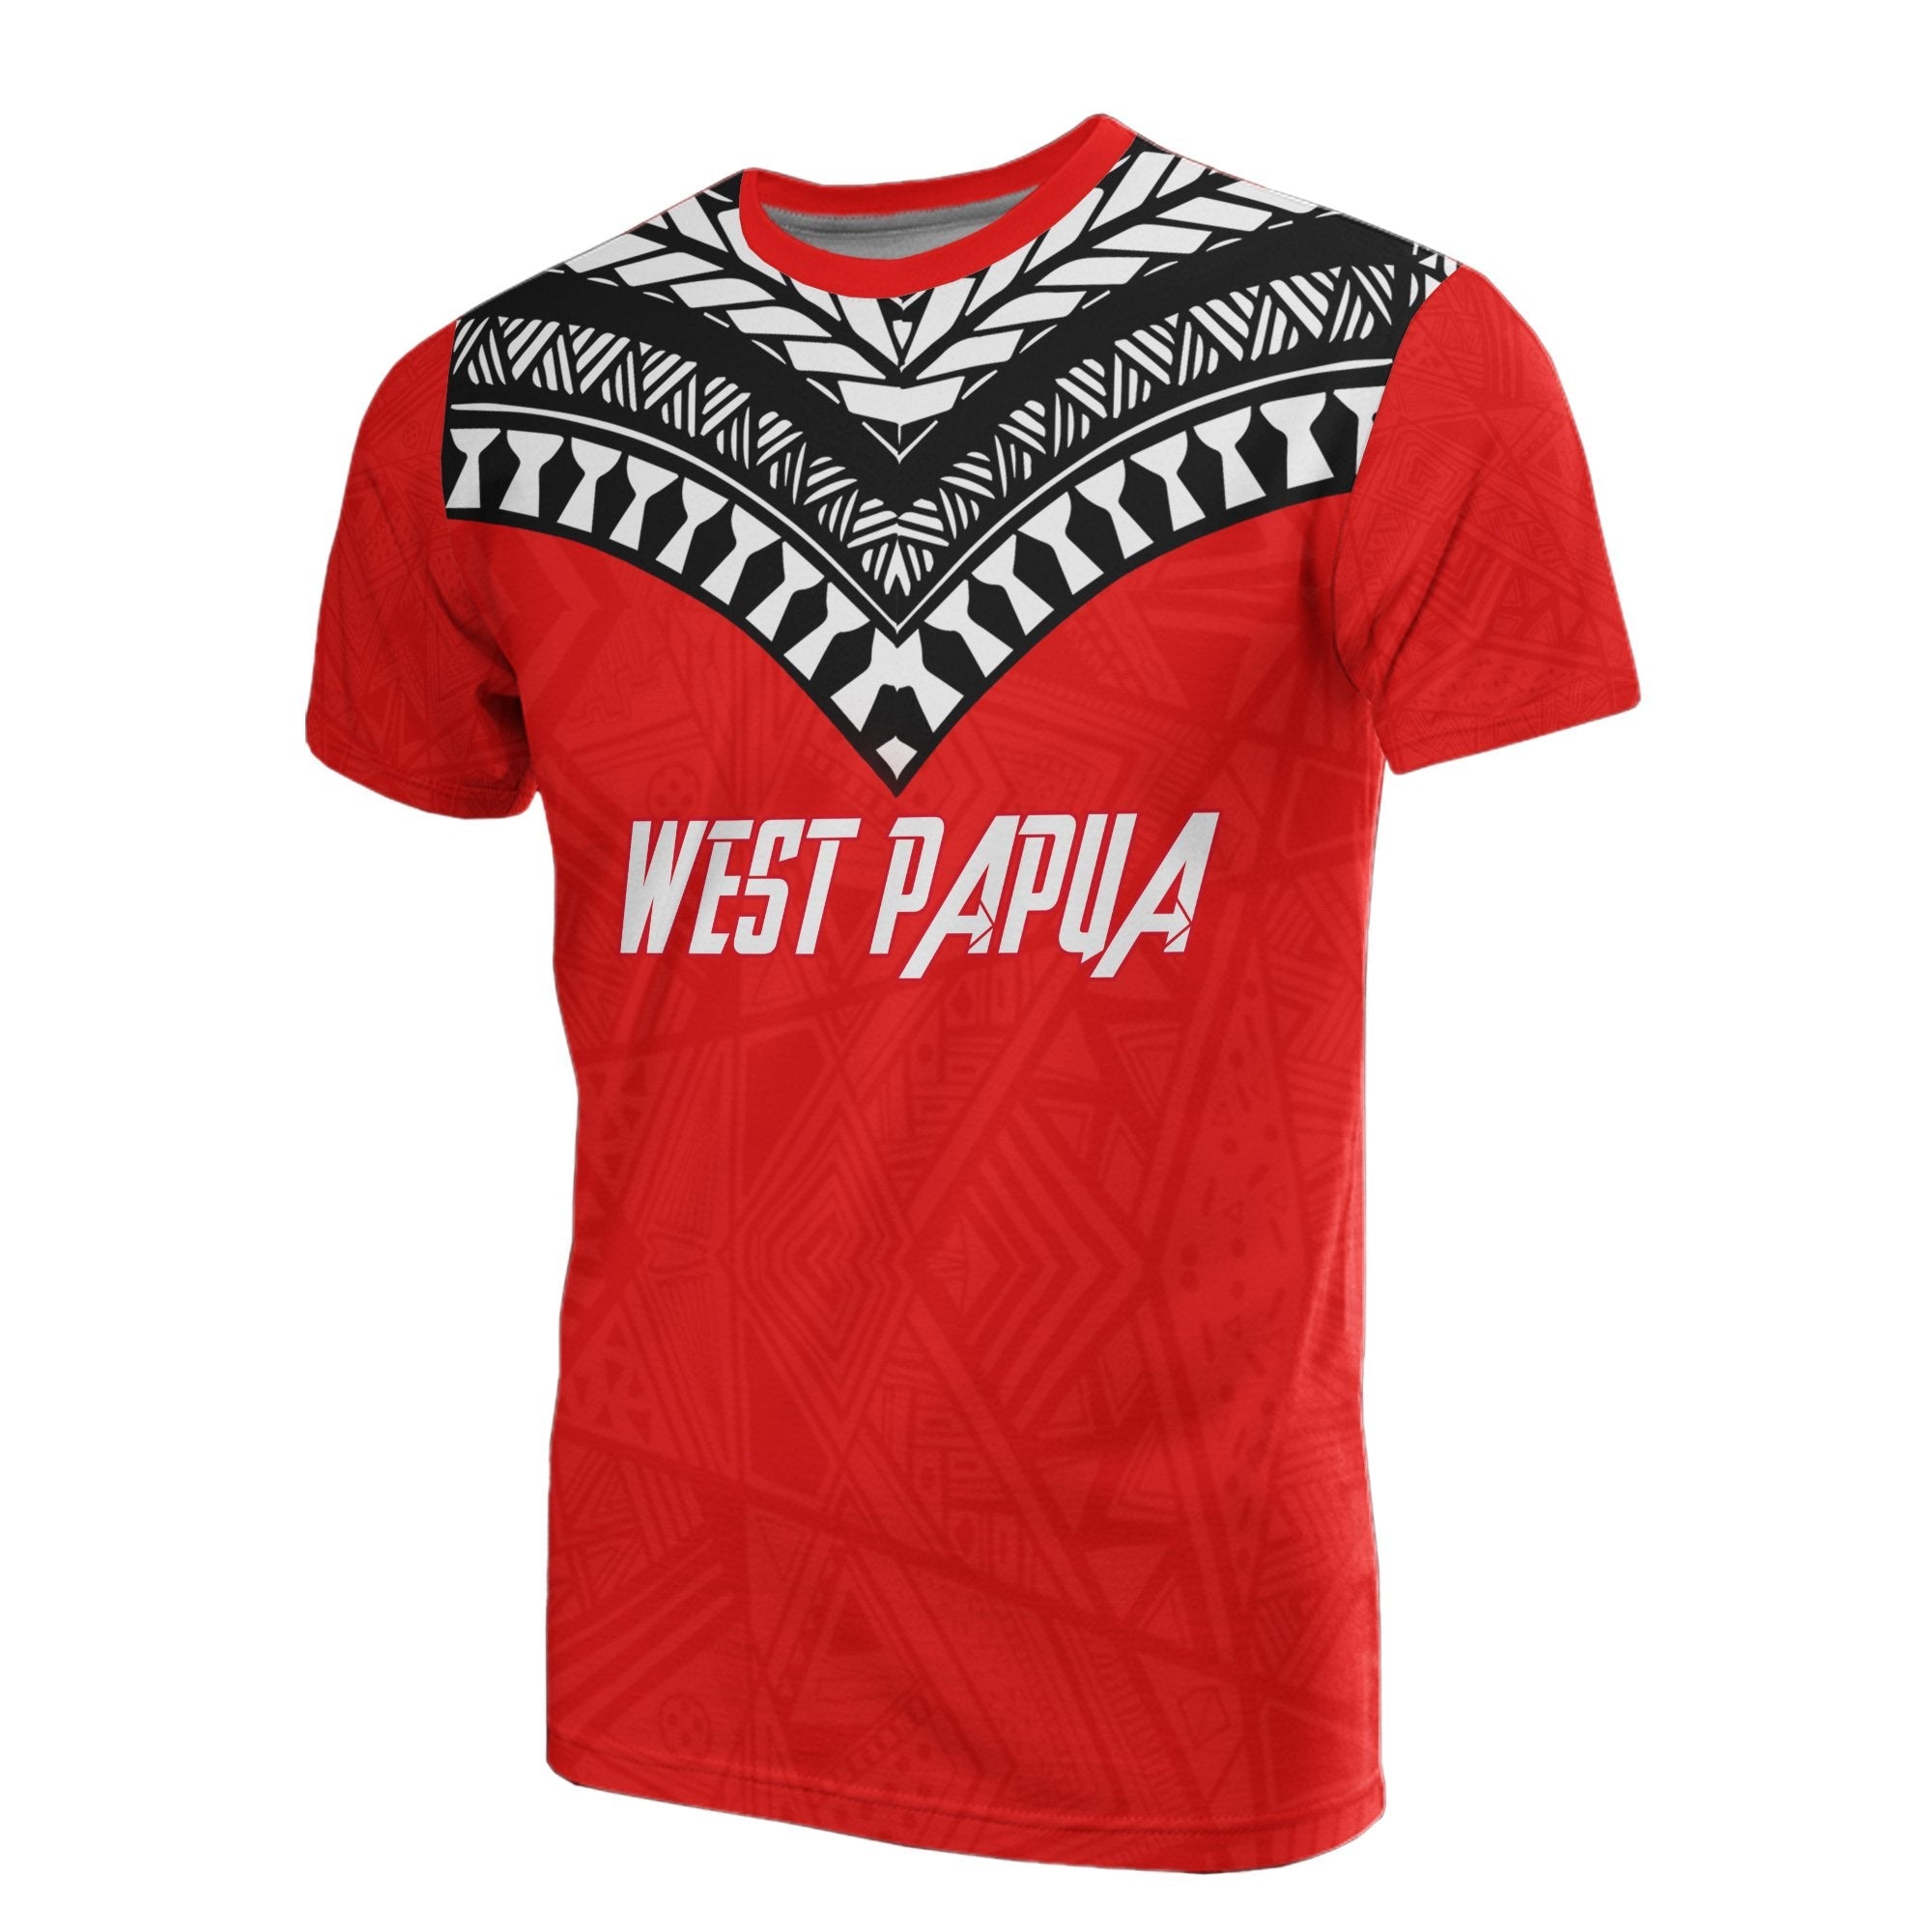 west-papua-all-over-t-shirt-west-papua-flag-style